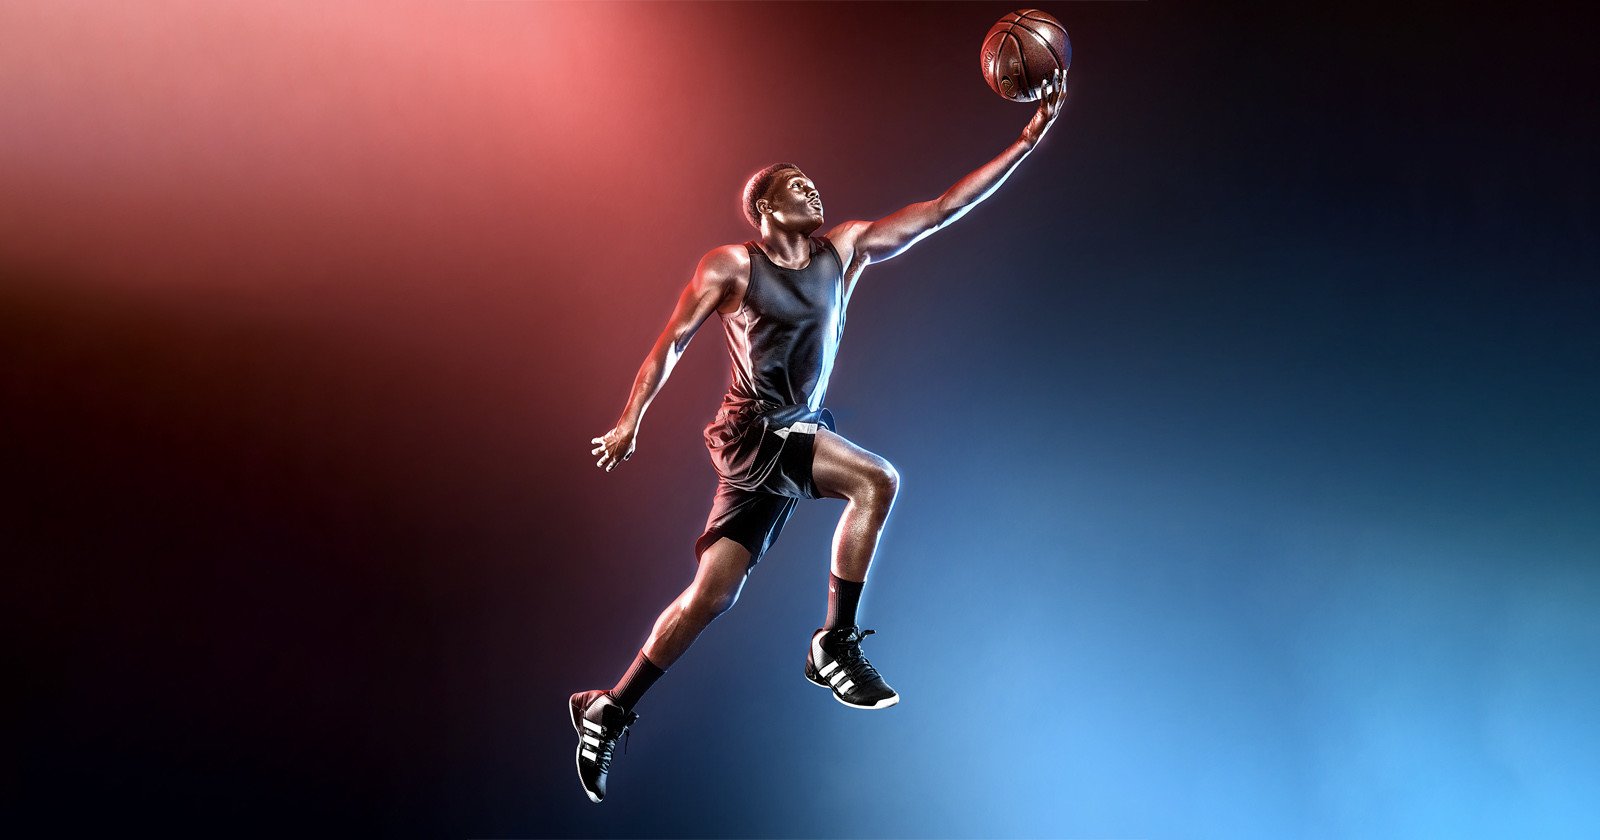  sports art photographing athletes different from photography 